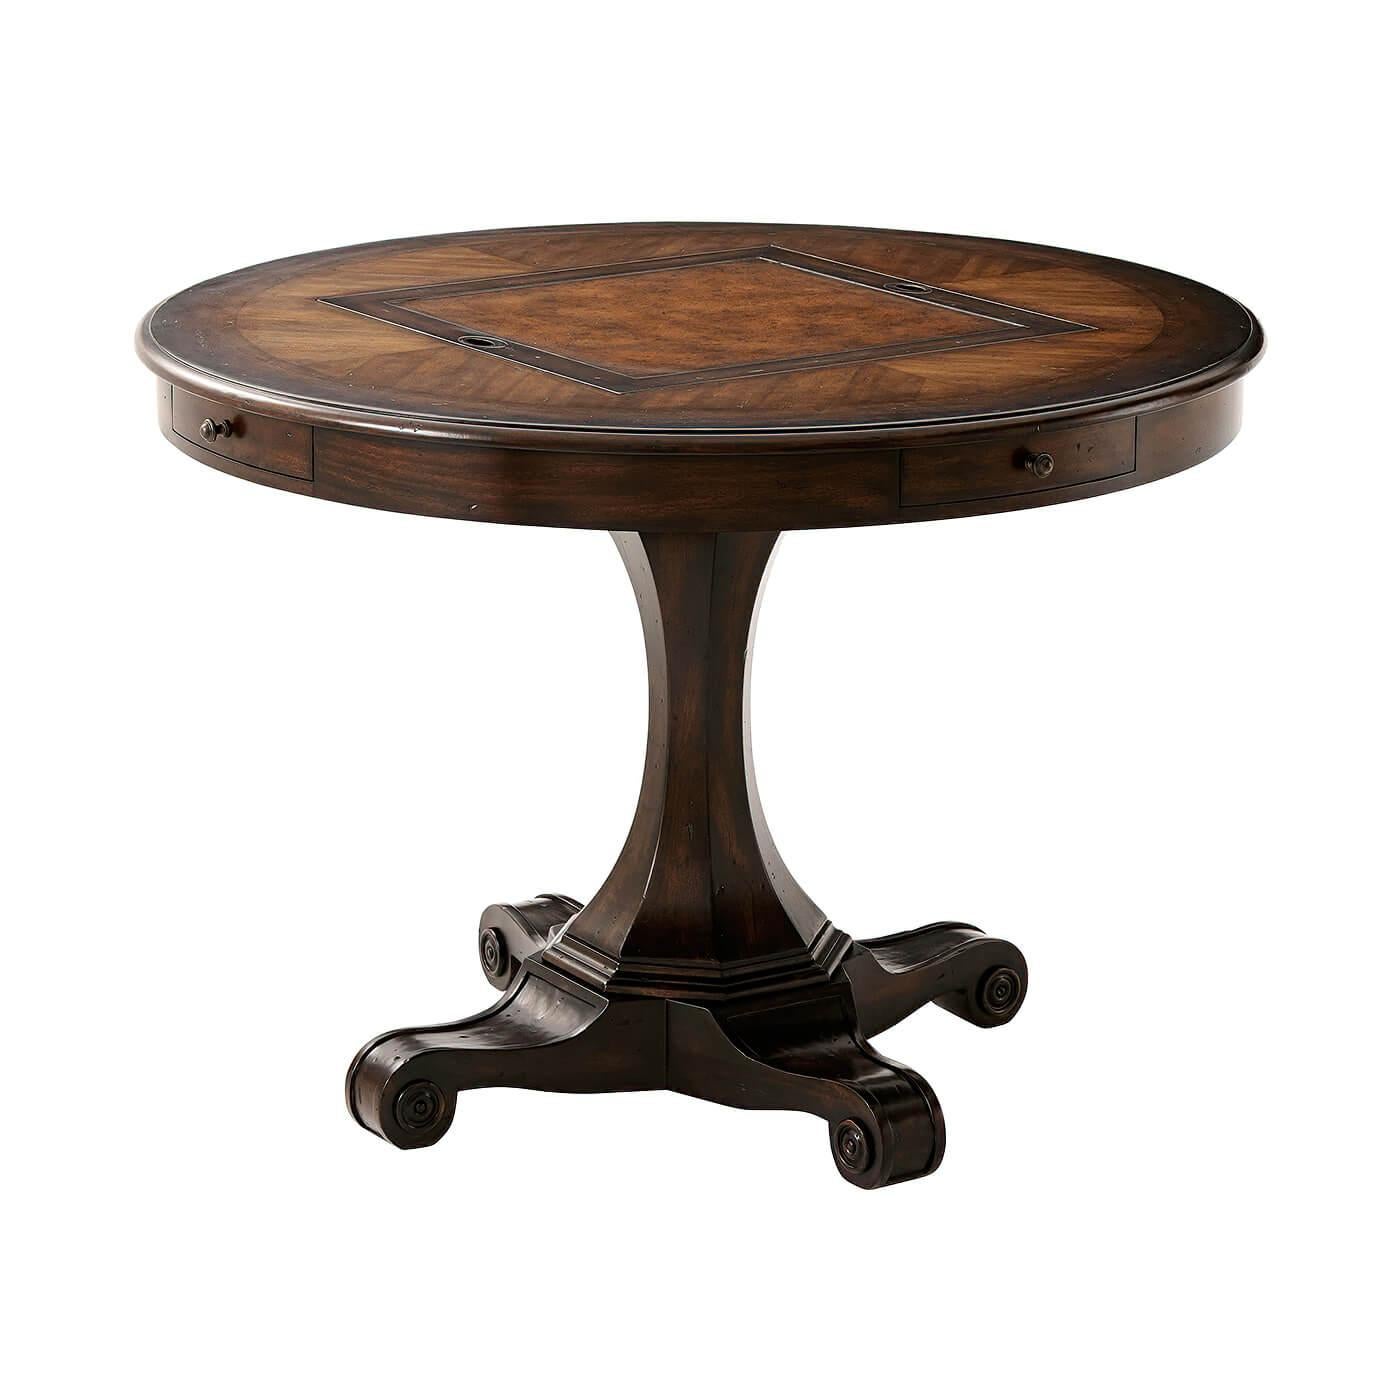 Italian style rustic round game table with molded edge, made of mahogany, acacia and oak parquetry with reversible leather and chess inlaid center, an inlaid Backgammon board well, on an octagonal flared column pedestal base. Includes a wooden chess